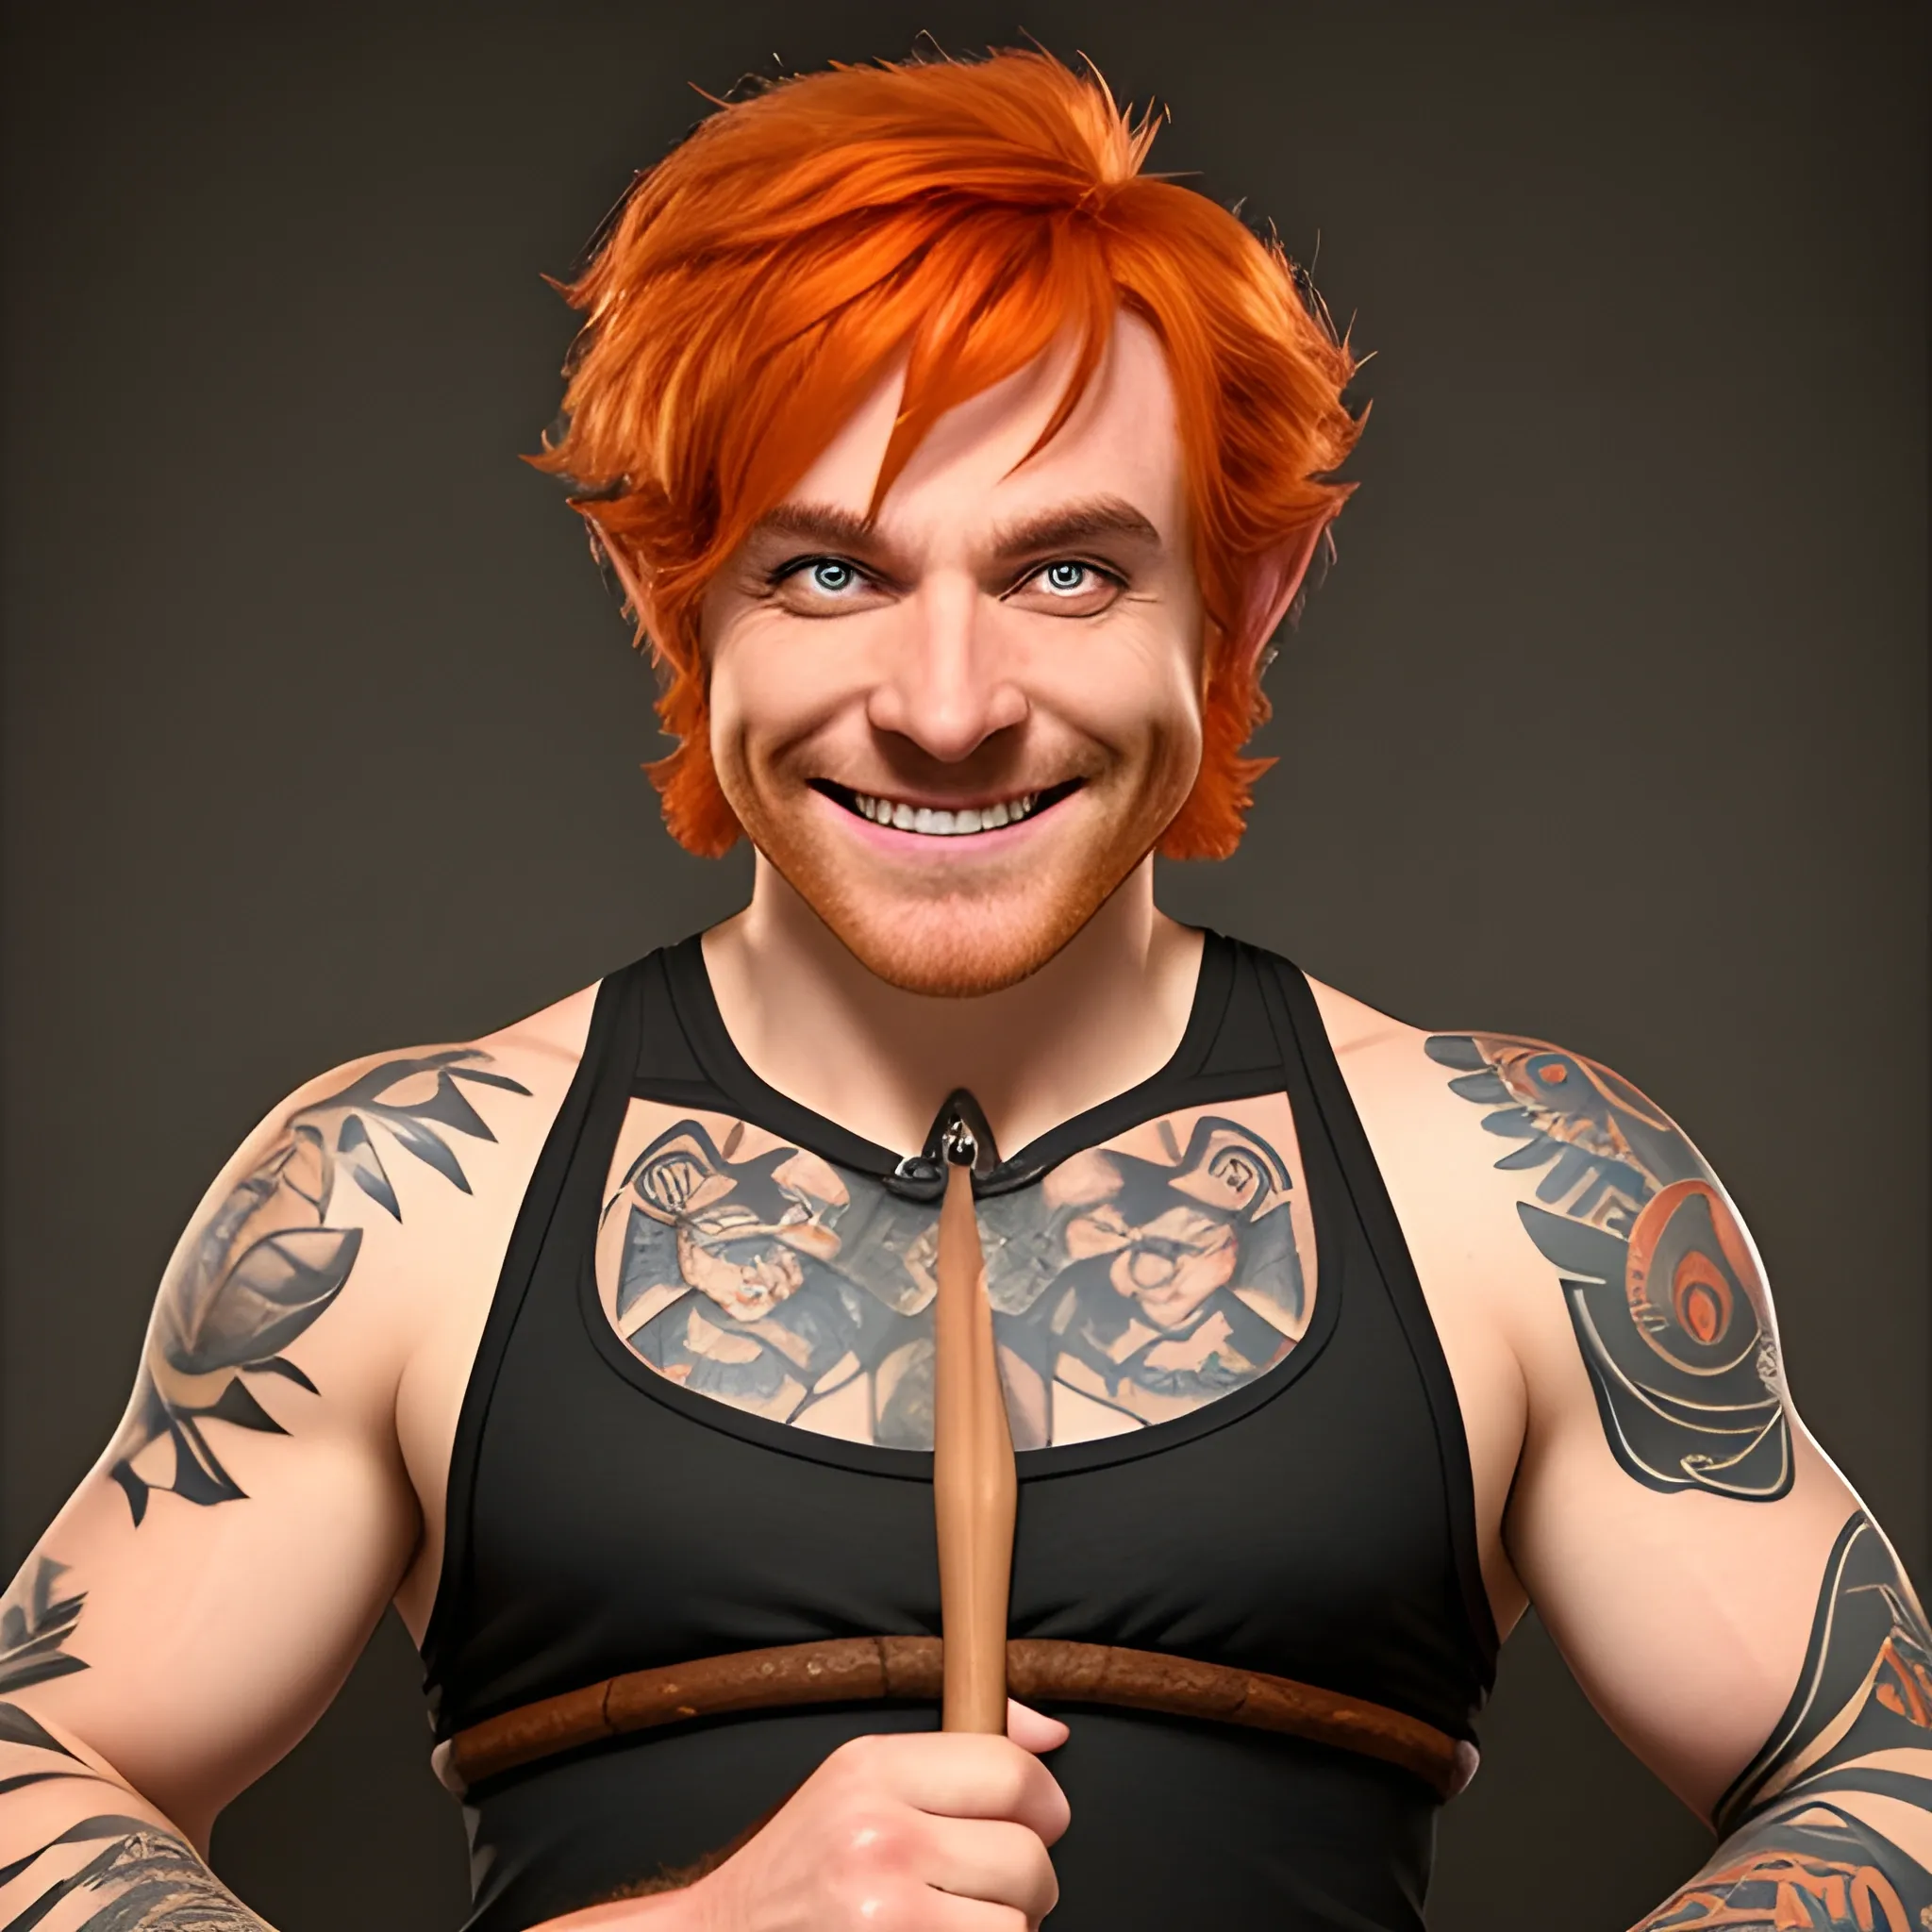 DnD  weak slim baby face halfling male short haired dark orange ginger with a shoulder tattoo smiling with a mugshot expression and playing a small drum 